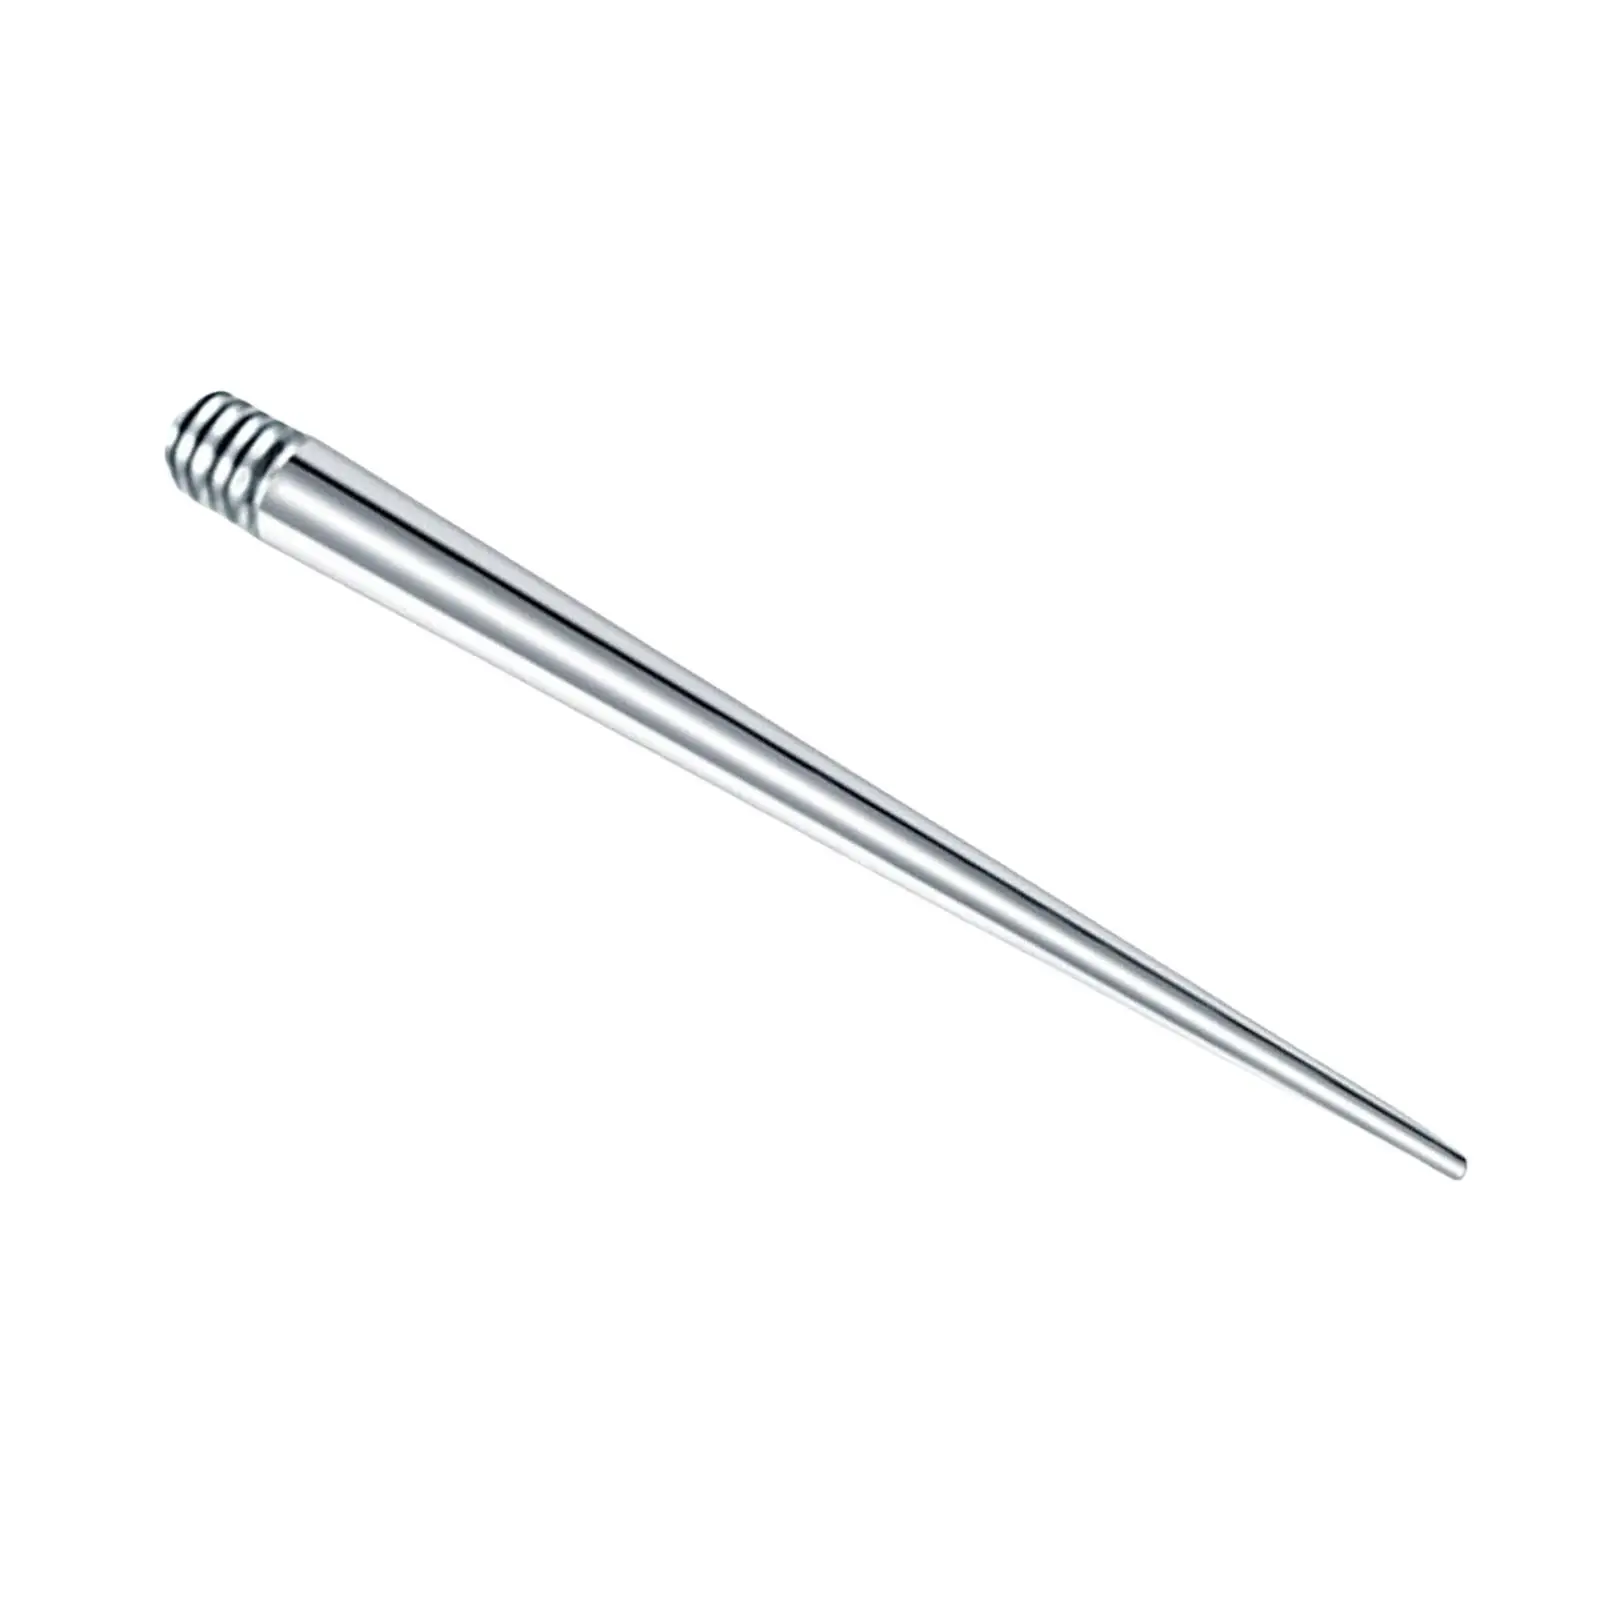 Threaded Taper for Threaded Jewelry Piercing Tool Stainless Steel for Ears